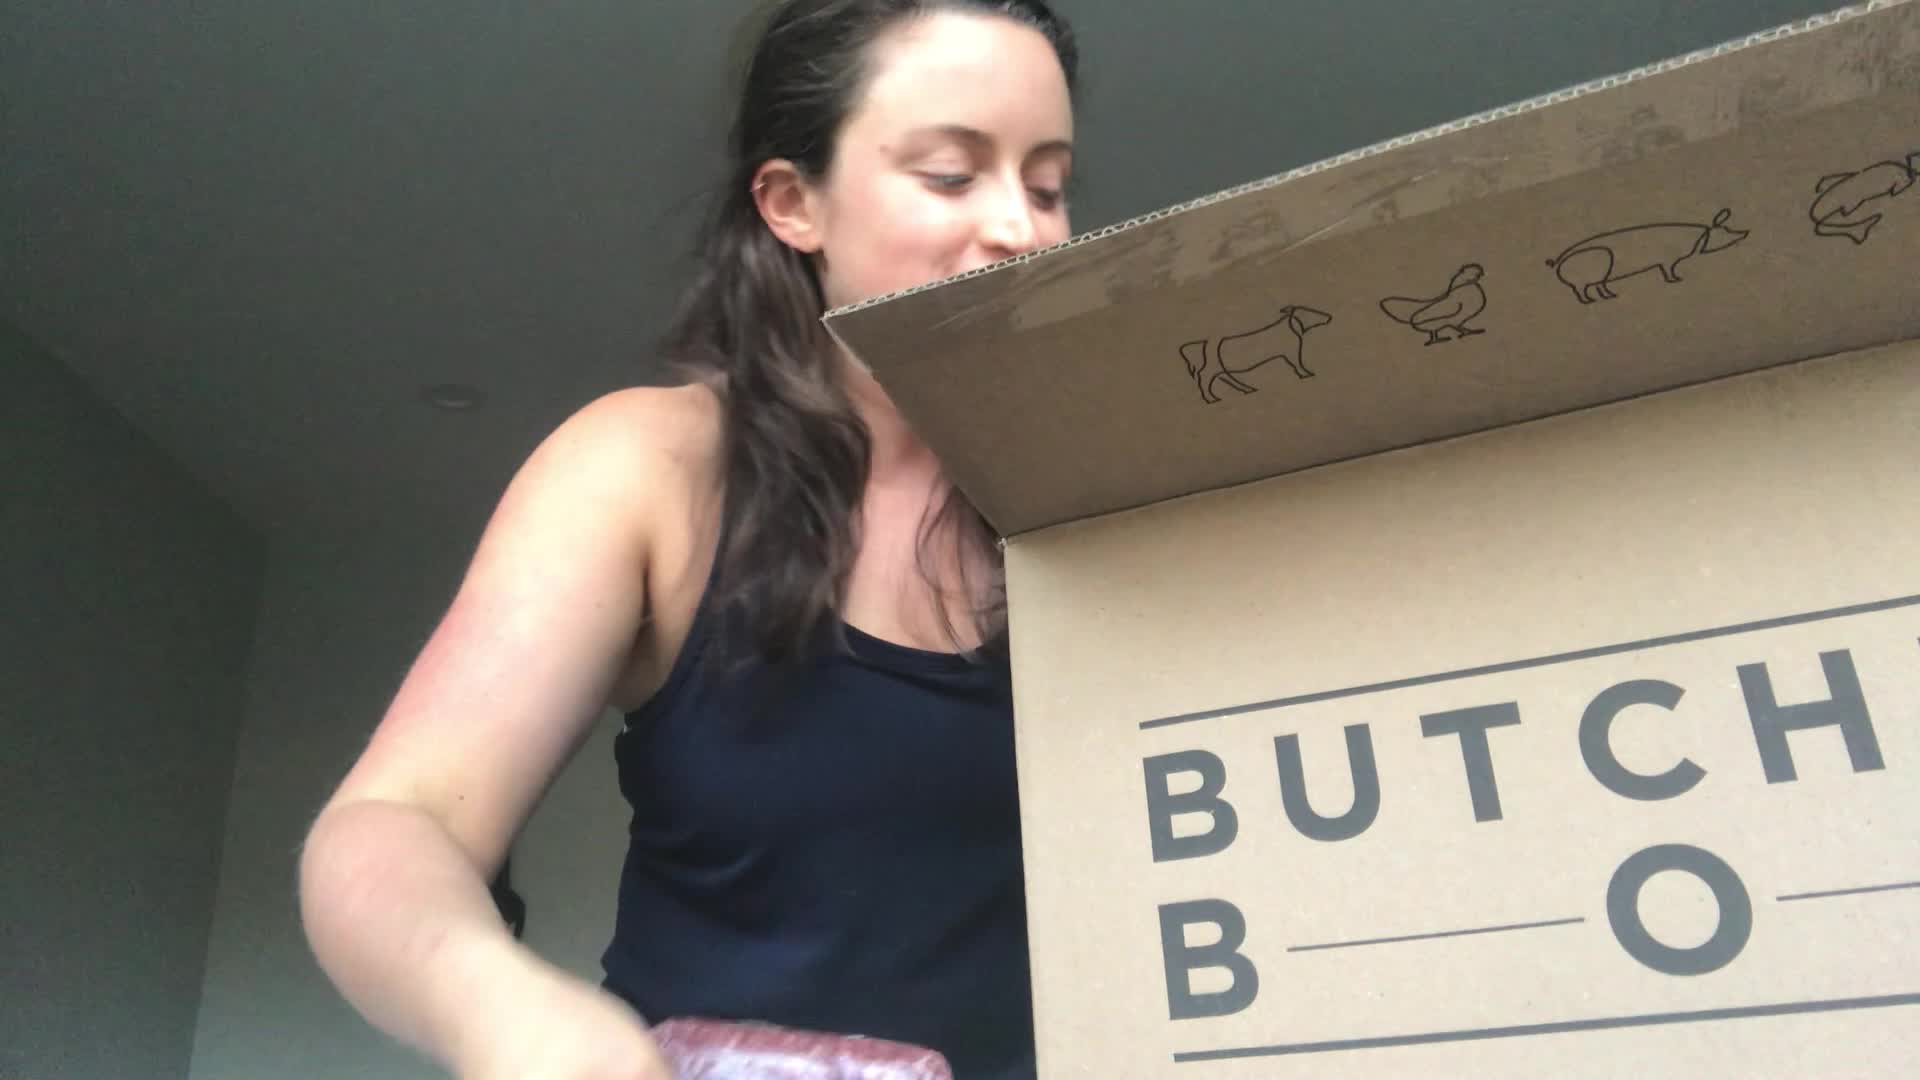 ButcherBox Prices: Is Butcher Box Worth it? - The Clean Eating Couple